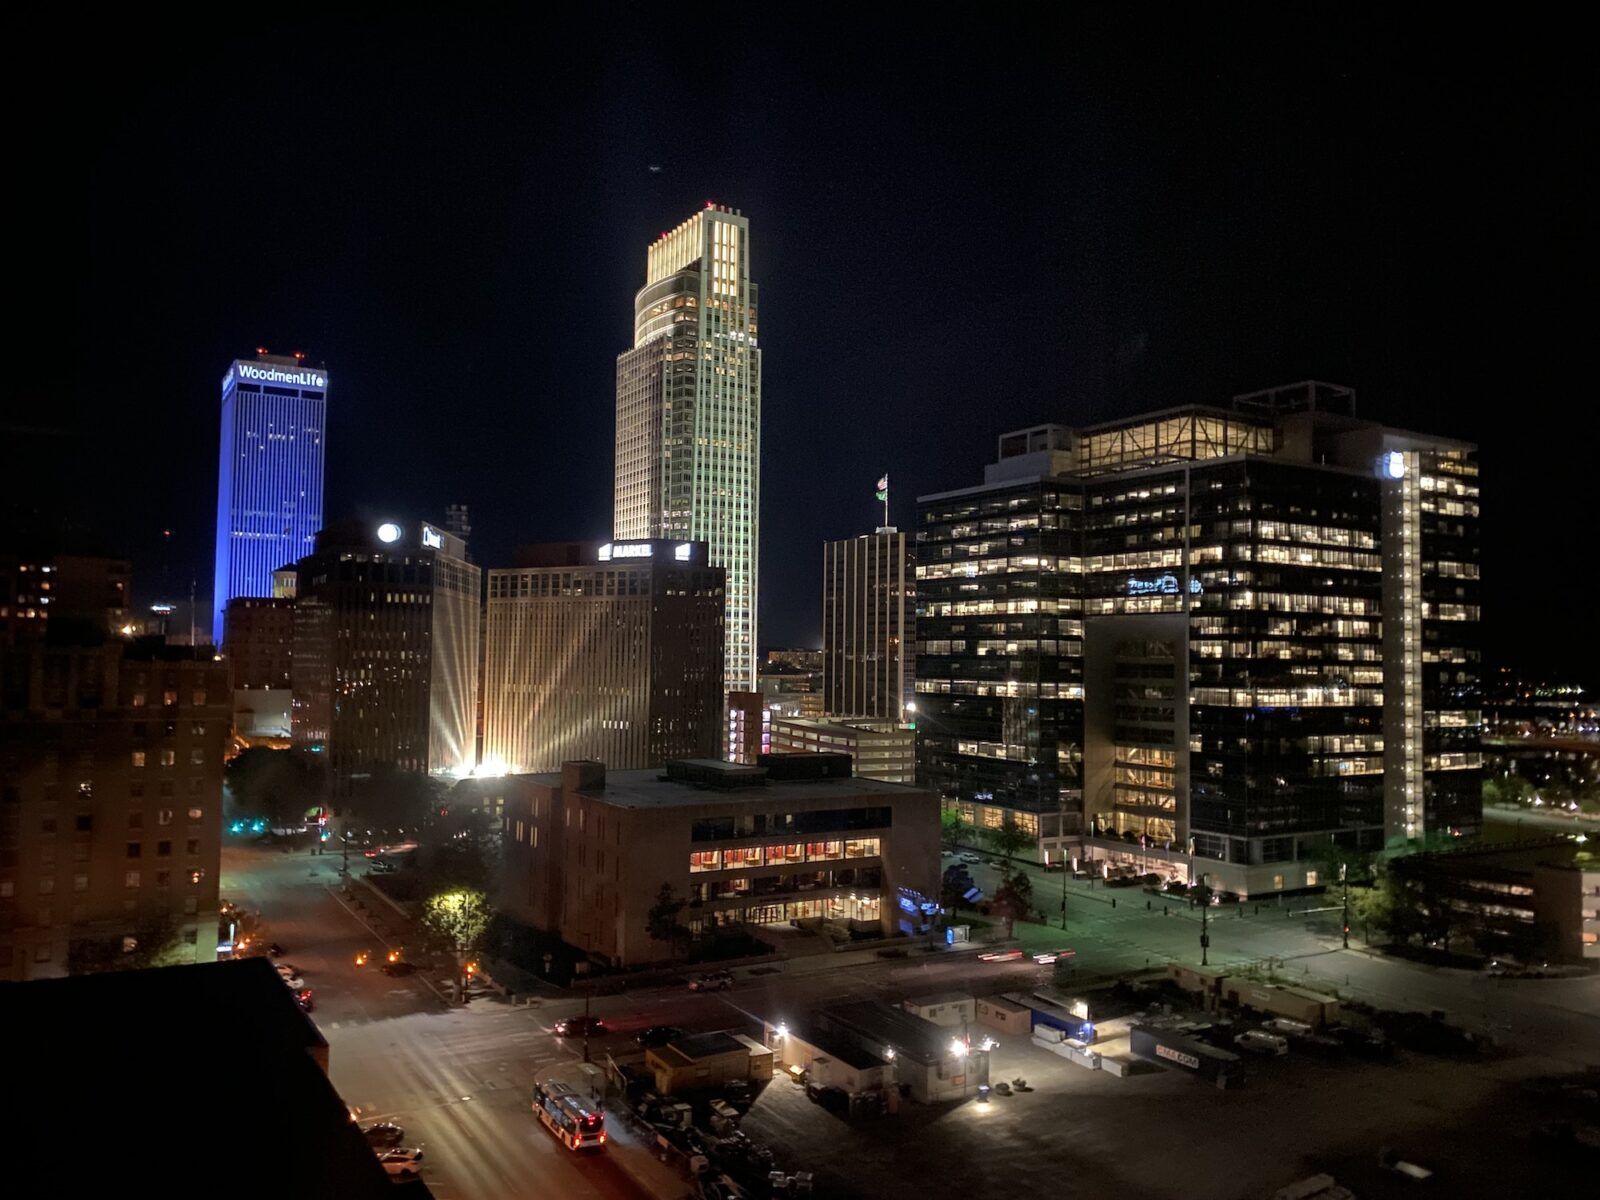 City lights in downtown Omaha